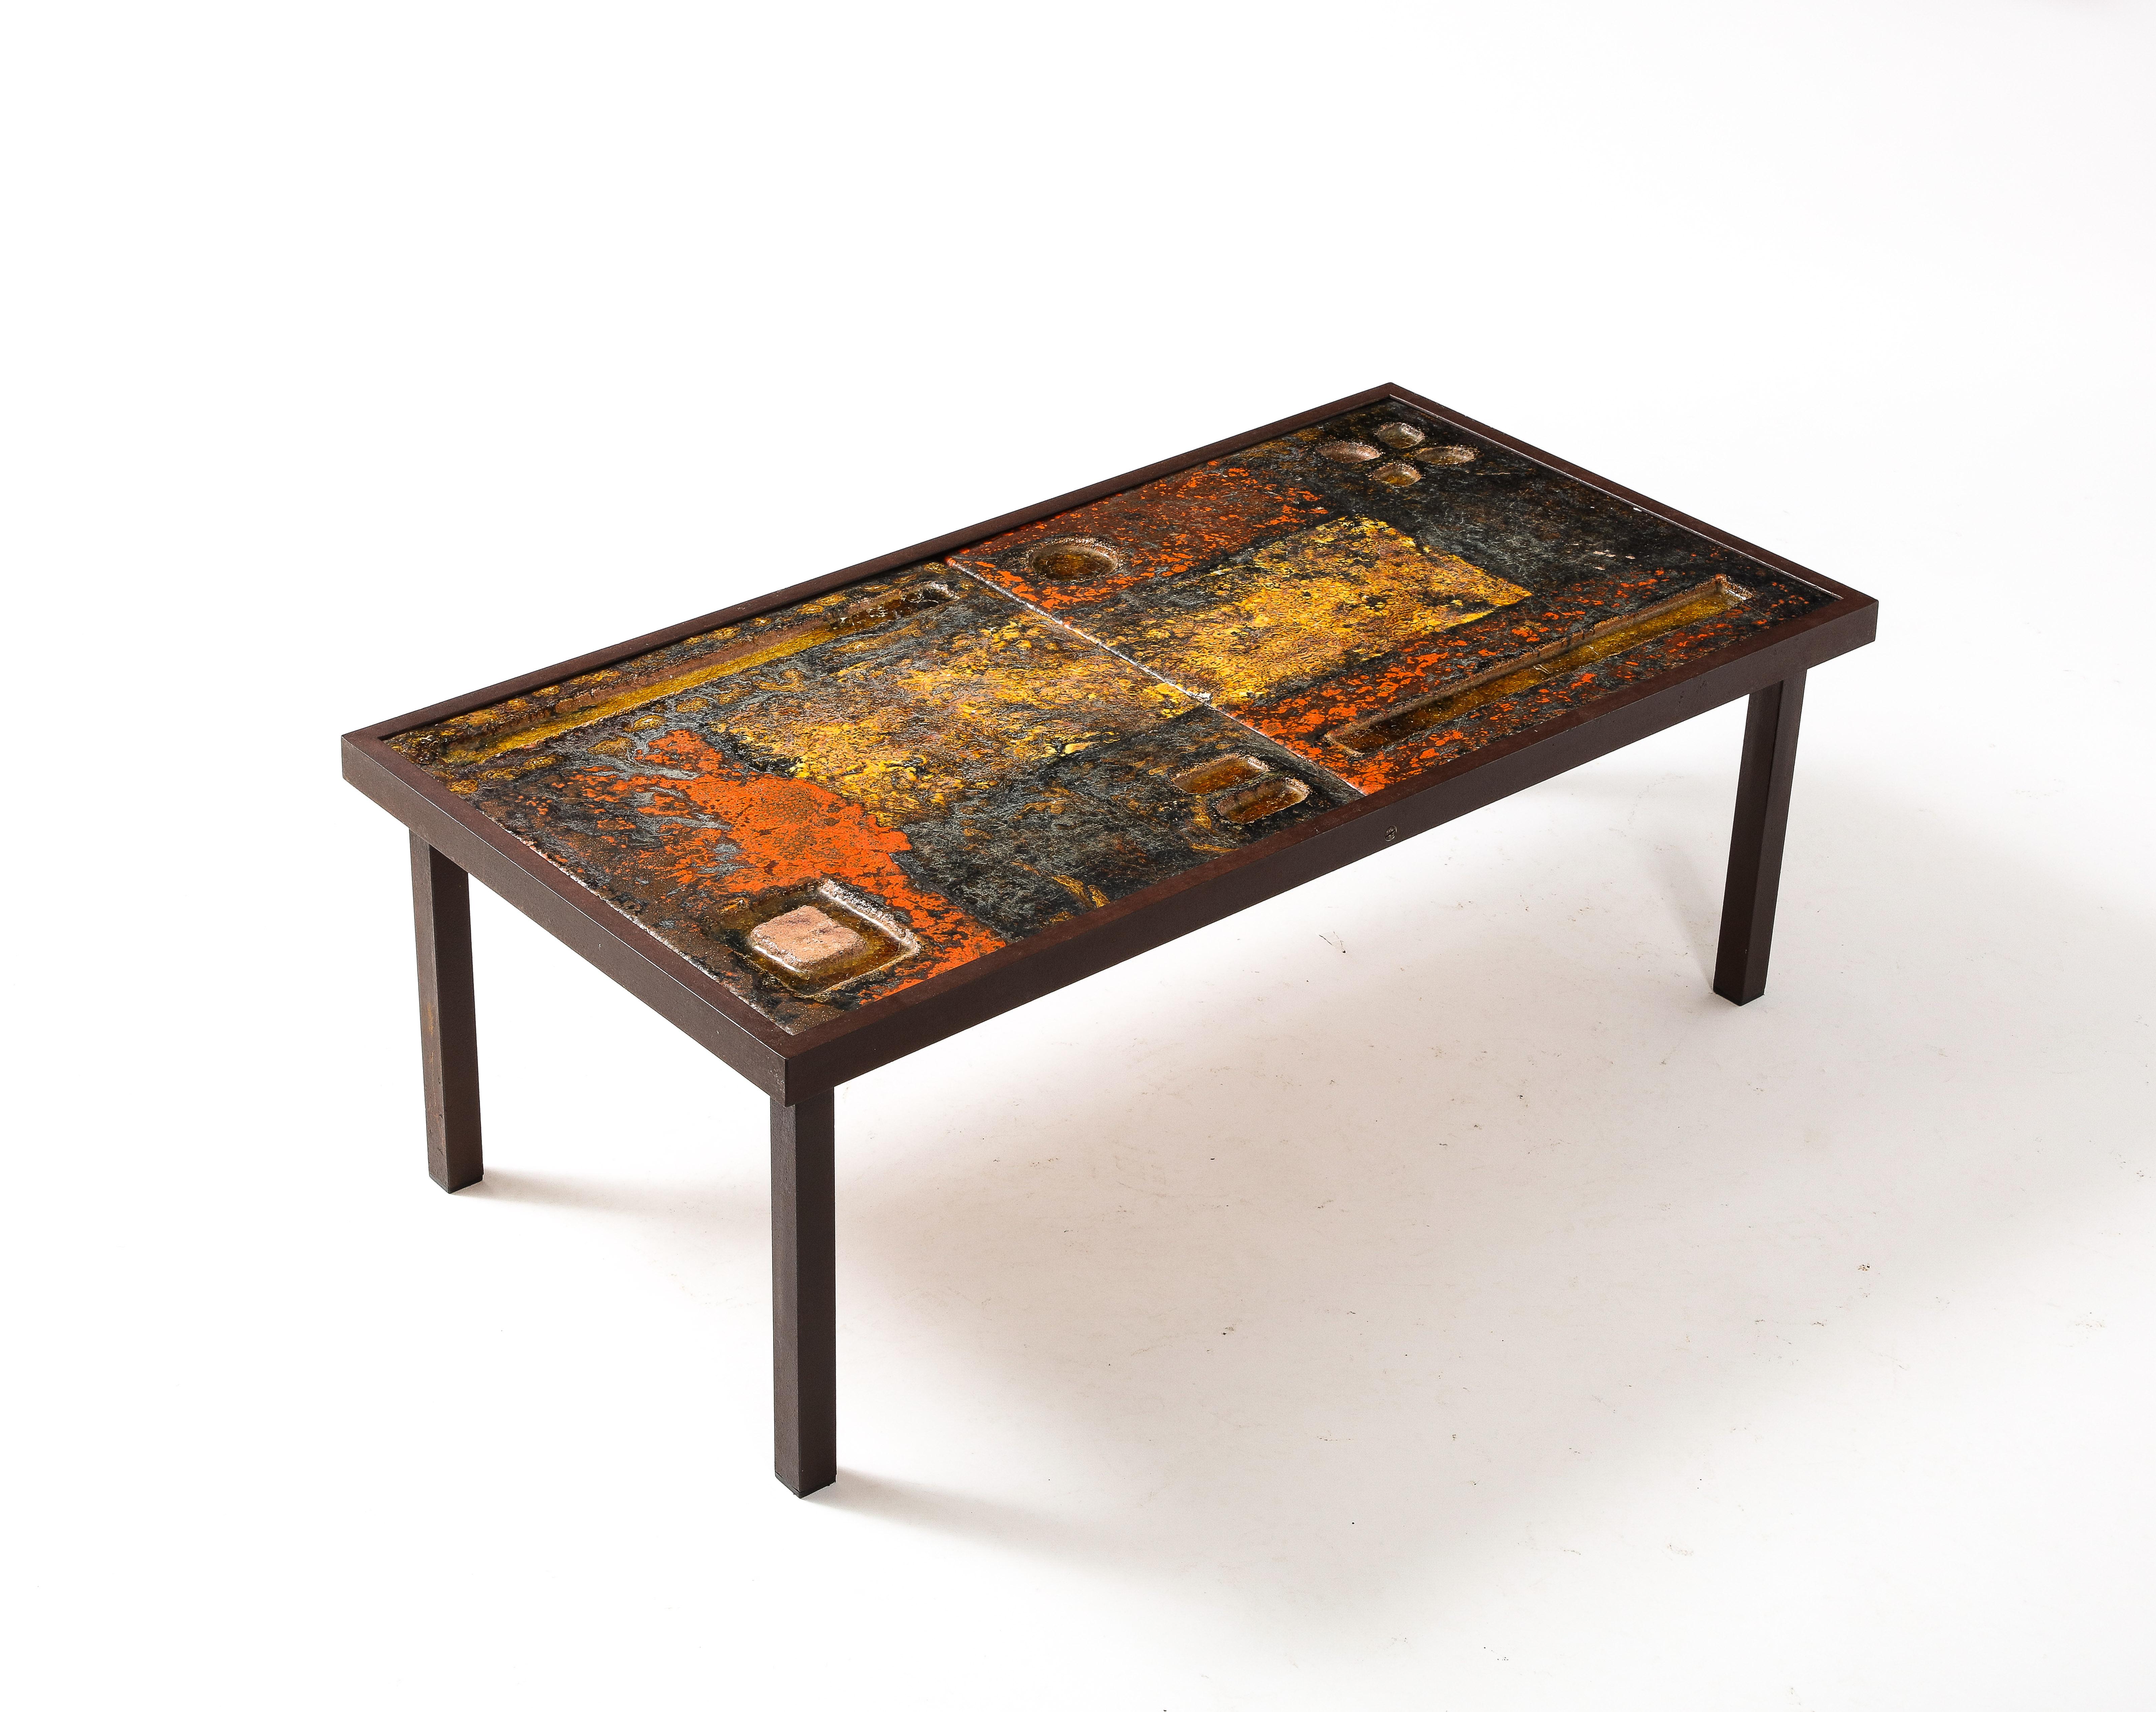 Enameled Cloutiers Freres Lava Tiles Coffee Table, France 1960s For Sale